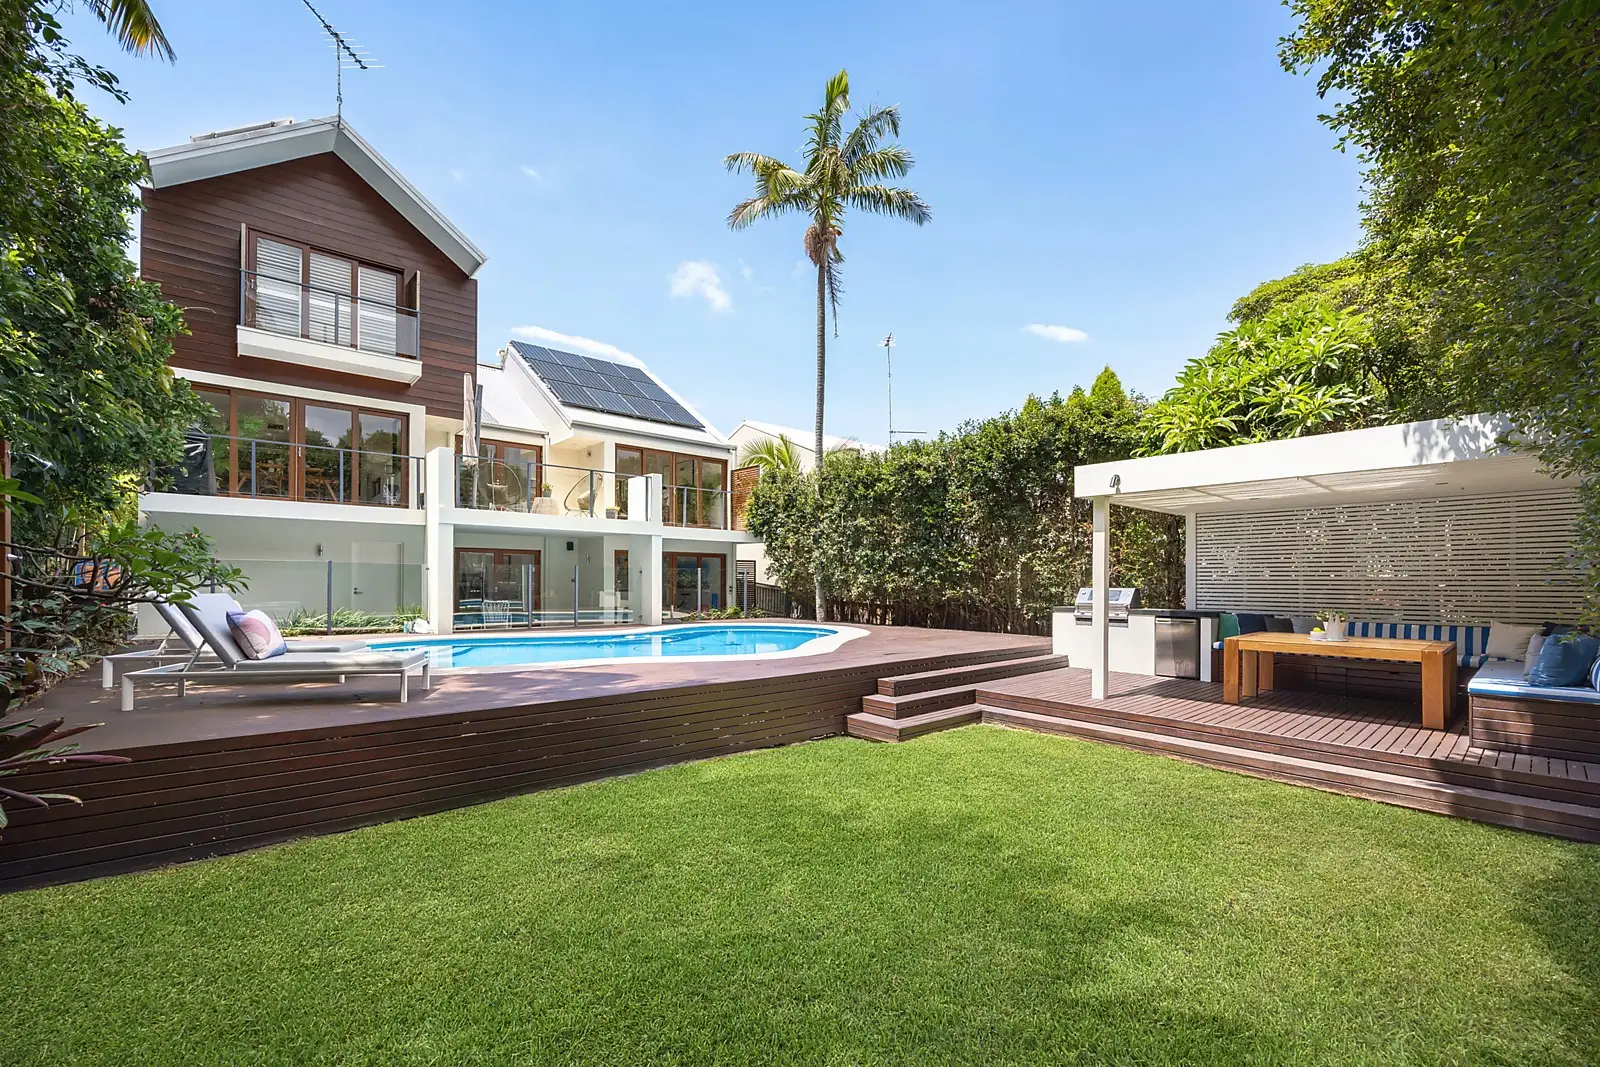 Photo #1: 62 Brook Street, Coogee - Sold by Sydney Sotheby's International Realty